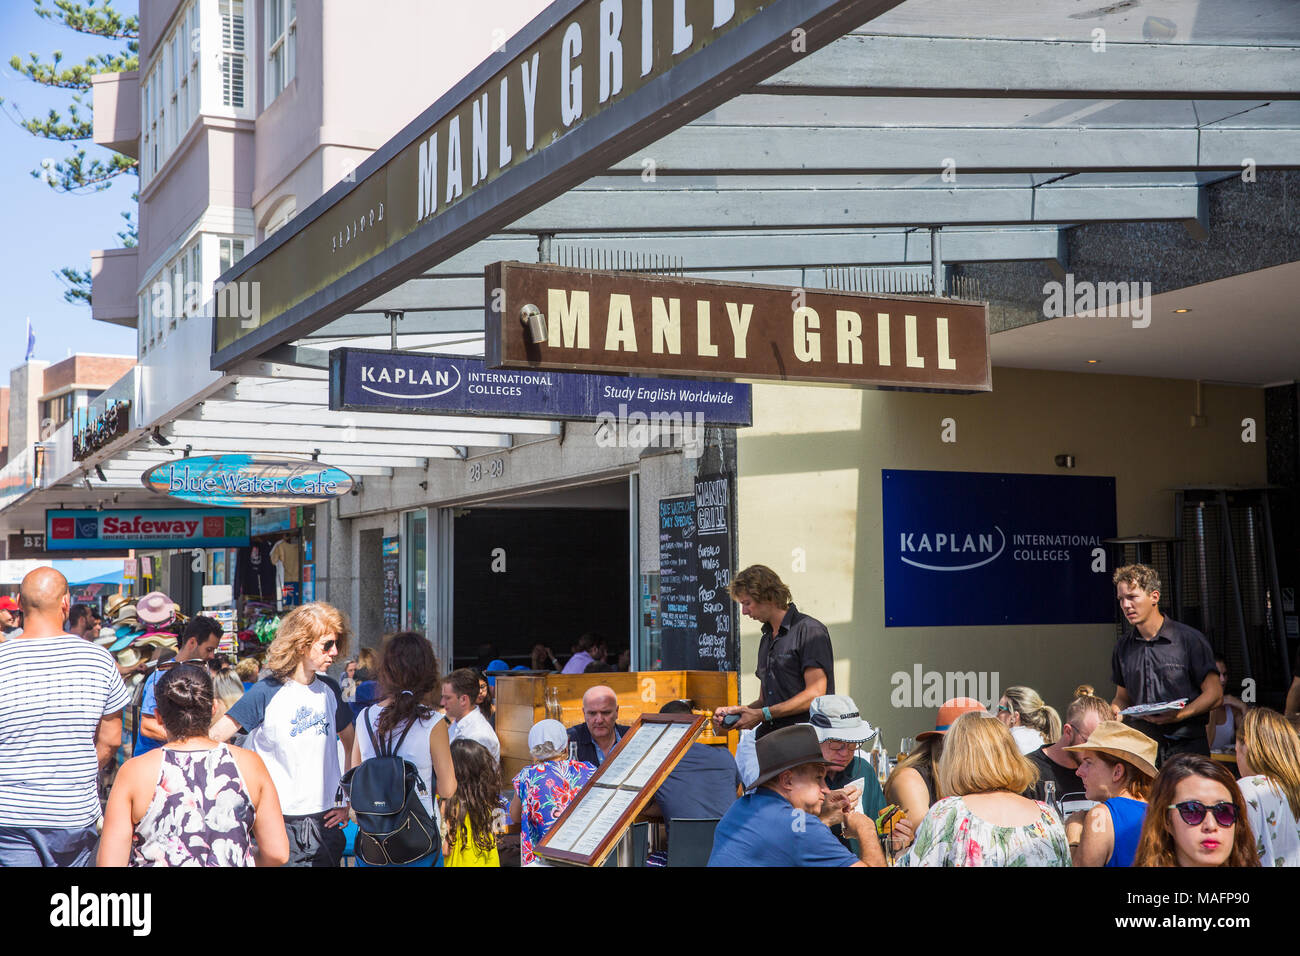 Manly Grill restaurant and cafe in Manly Beach,people enjoying lunch meal, Sydney,Australia during lunchtime Stock Photo